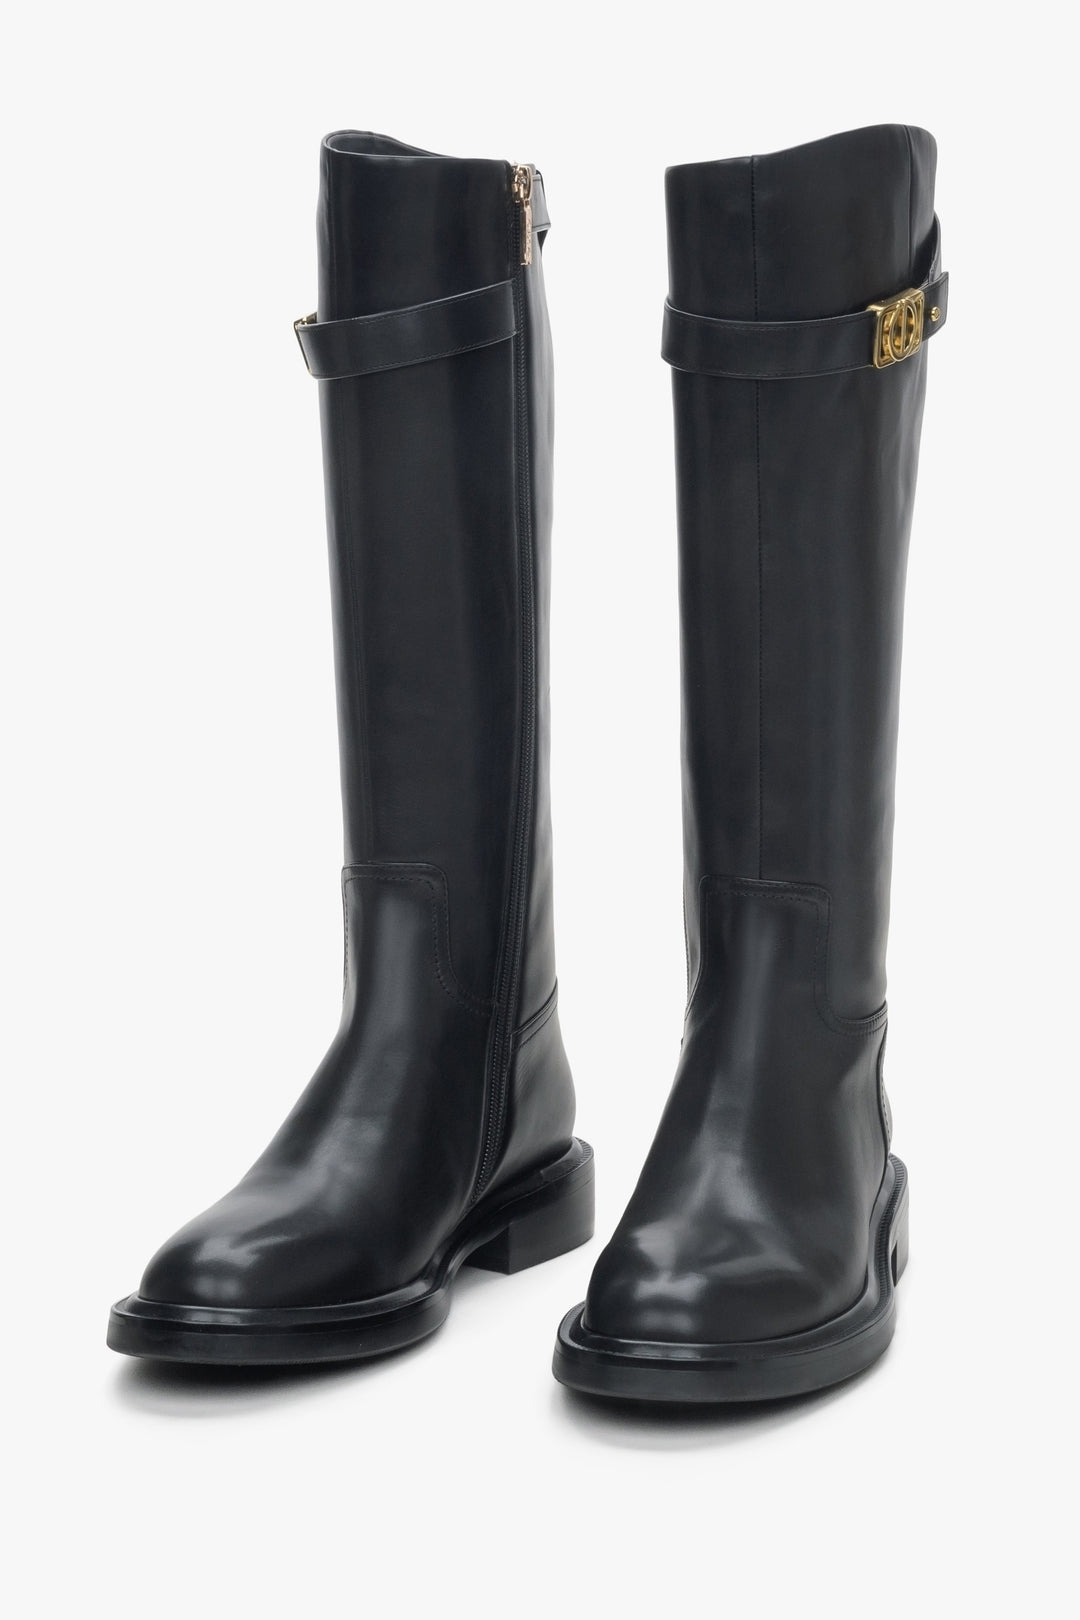 Women's black leather boots by Estro with a decorative strap - front view.